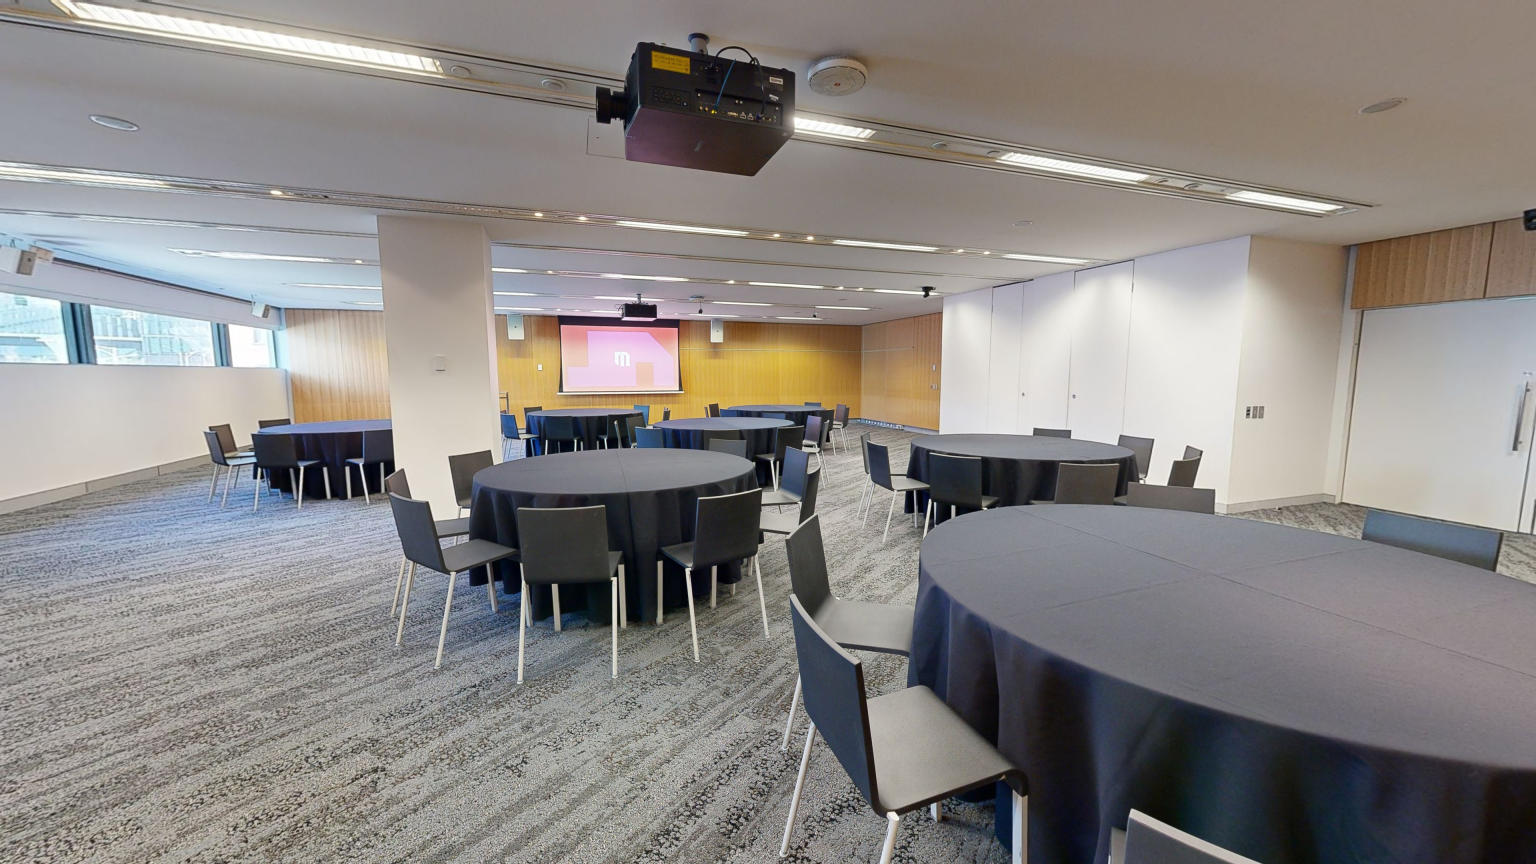 A conference or meeting room with arranged round tables and chairs for meetings or discussions. The tables focus around facing a large projector screen at the front of the room with a lectern to the left side. A strip of windows that sit at eye level run along side the far wall. 